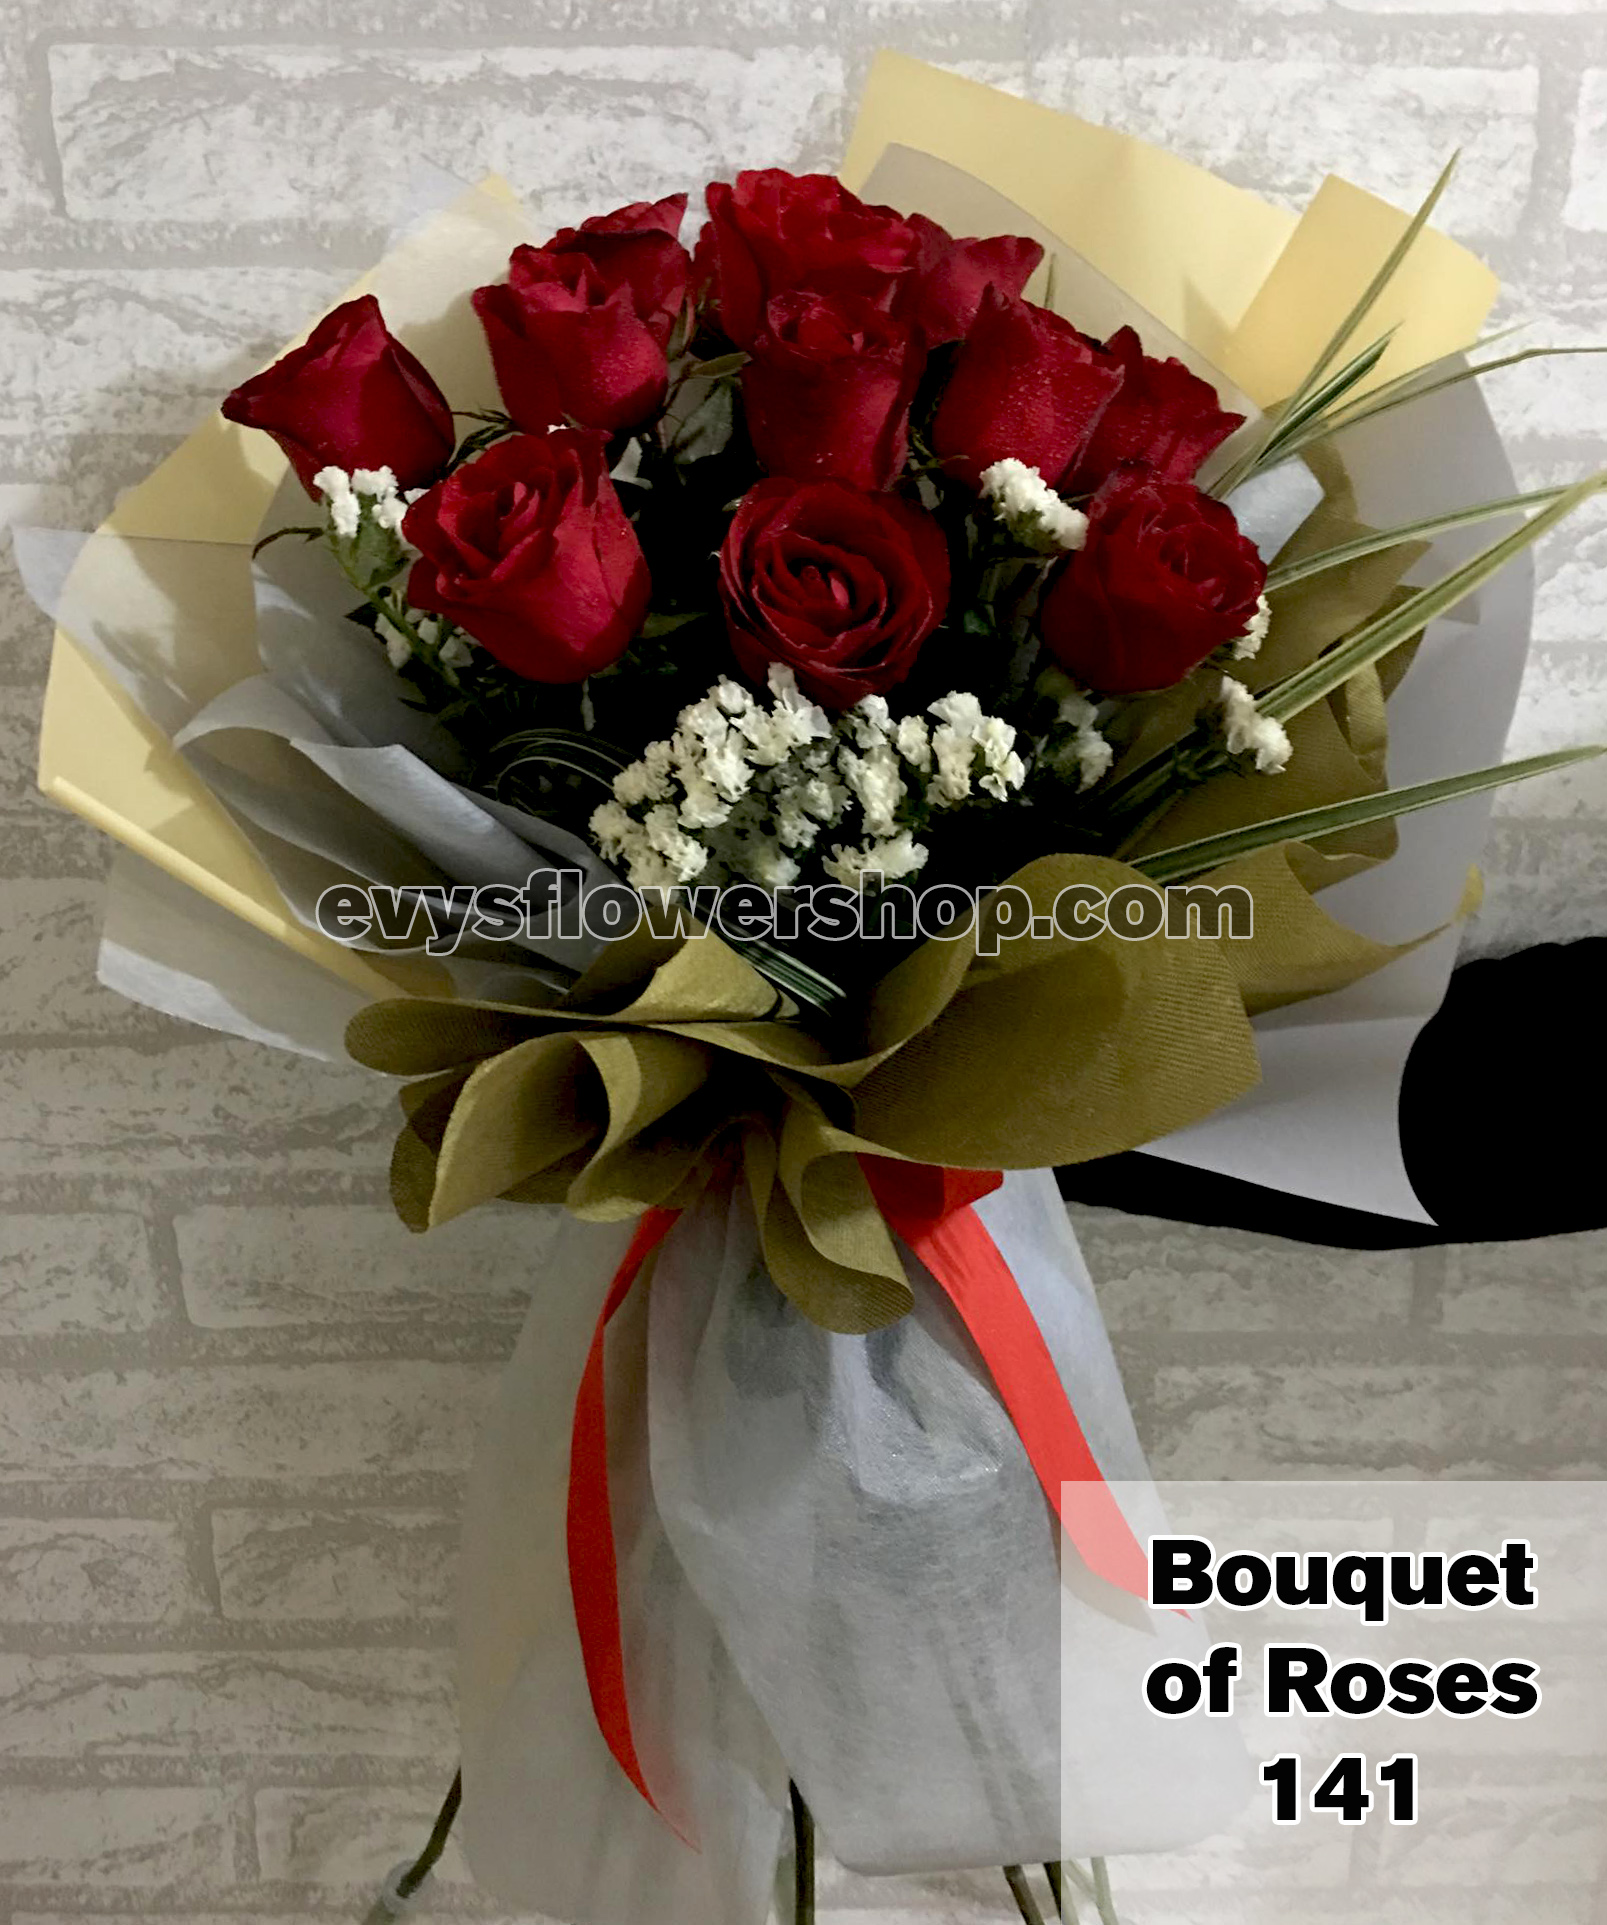 bouquet of roses 141 - EVYS FLOWER SHOP FREE DELIVERY